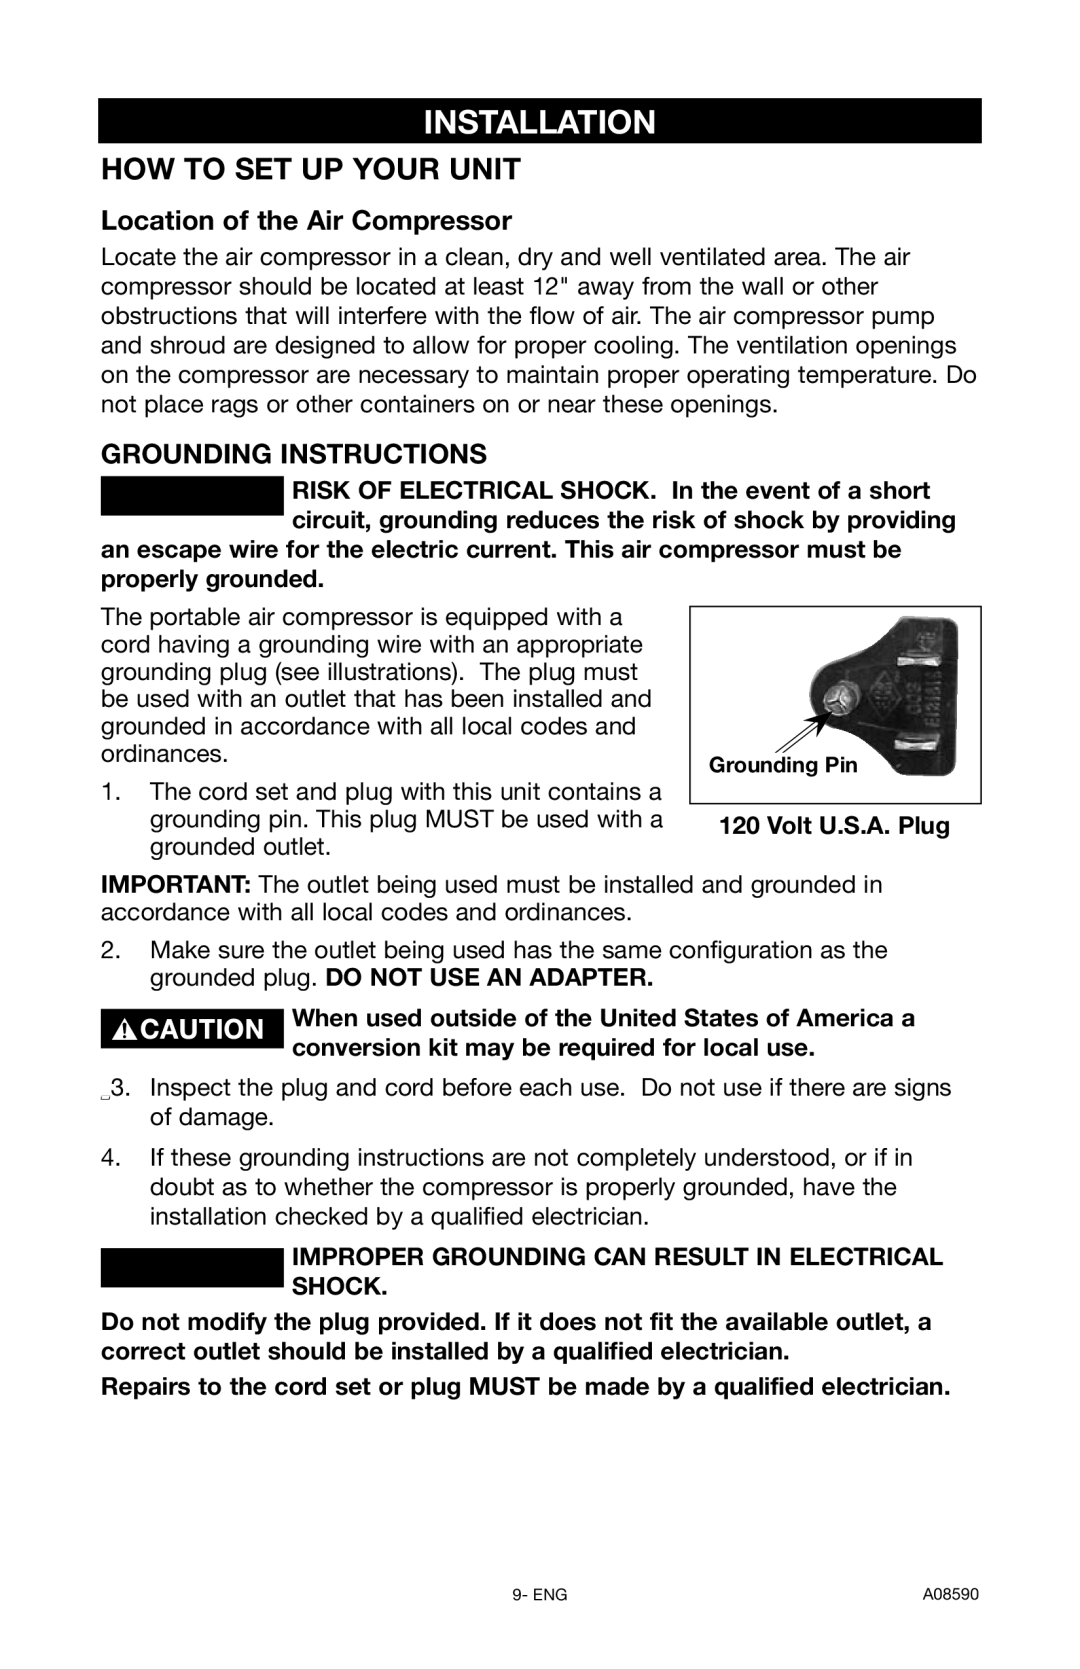 Delta A08590 Installation, How To Set Up Your Unit, Location of the Air Compressor, Grounding Instructions 